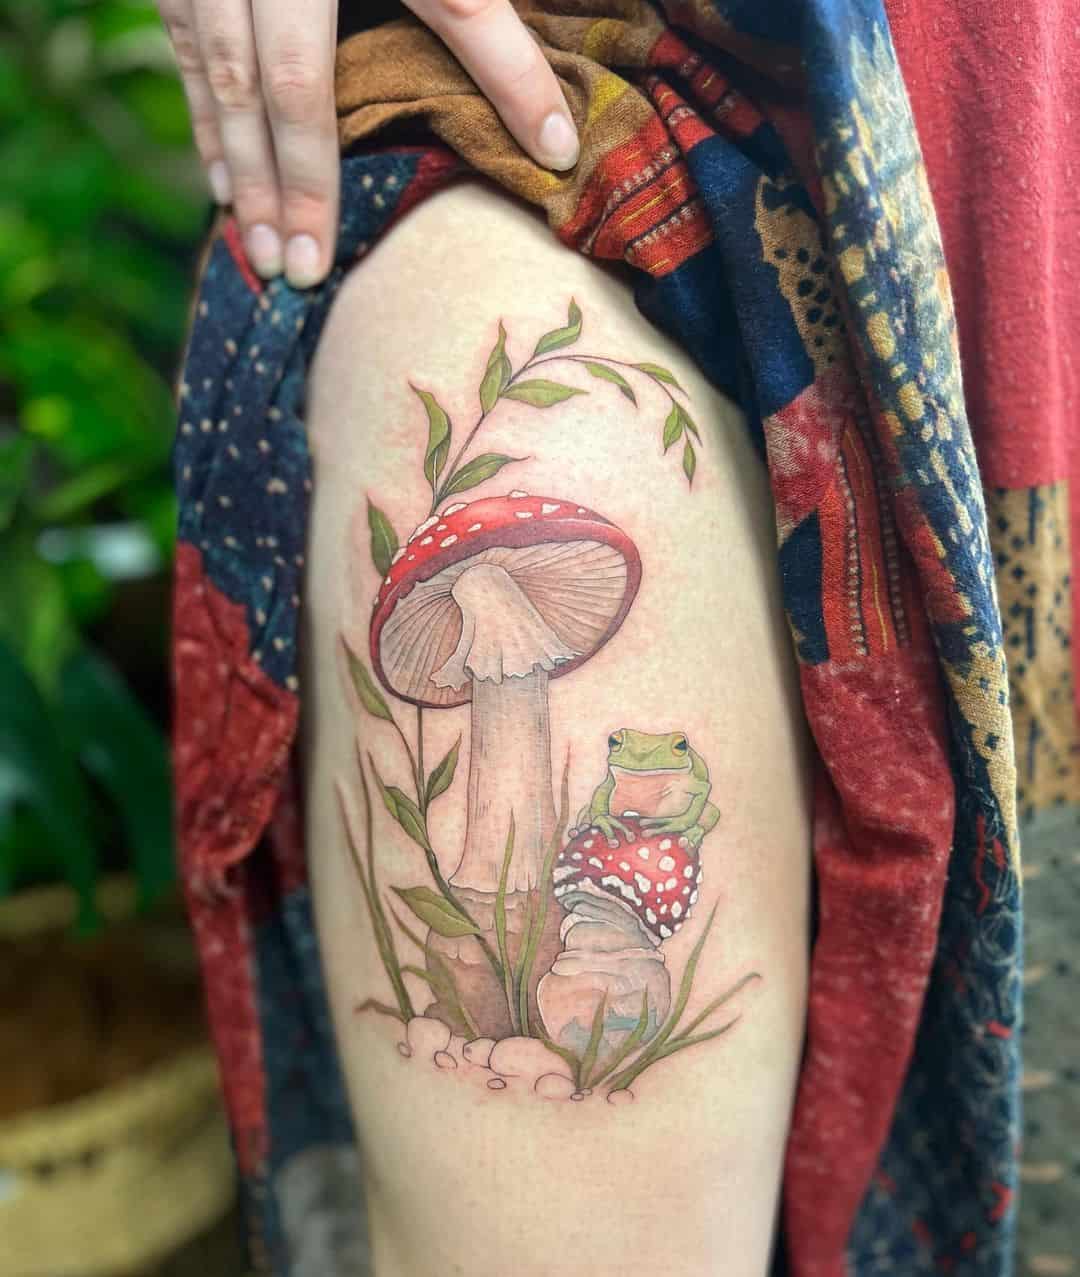 Magical Forest Sleeve With Mushroom House  Best Tattoo Ideas For Men   Women